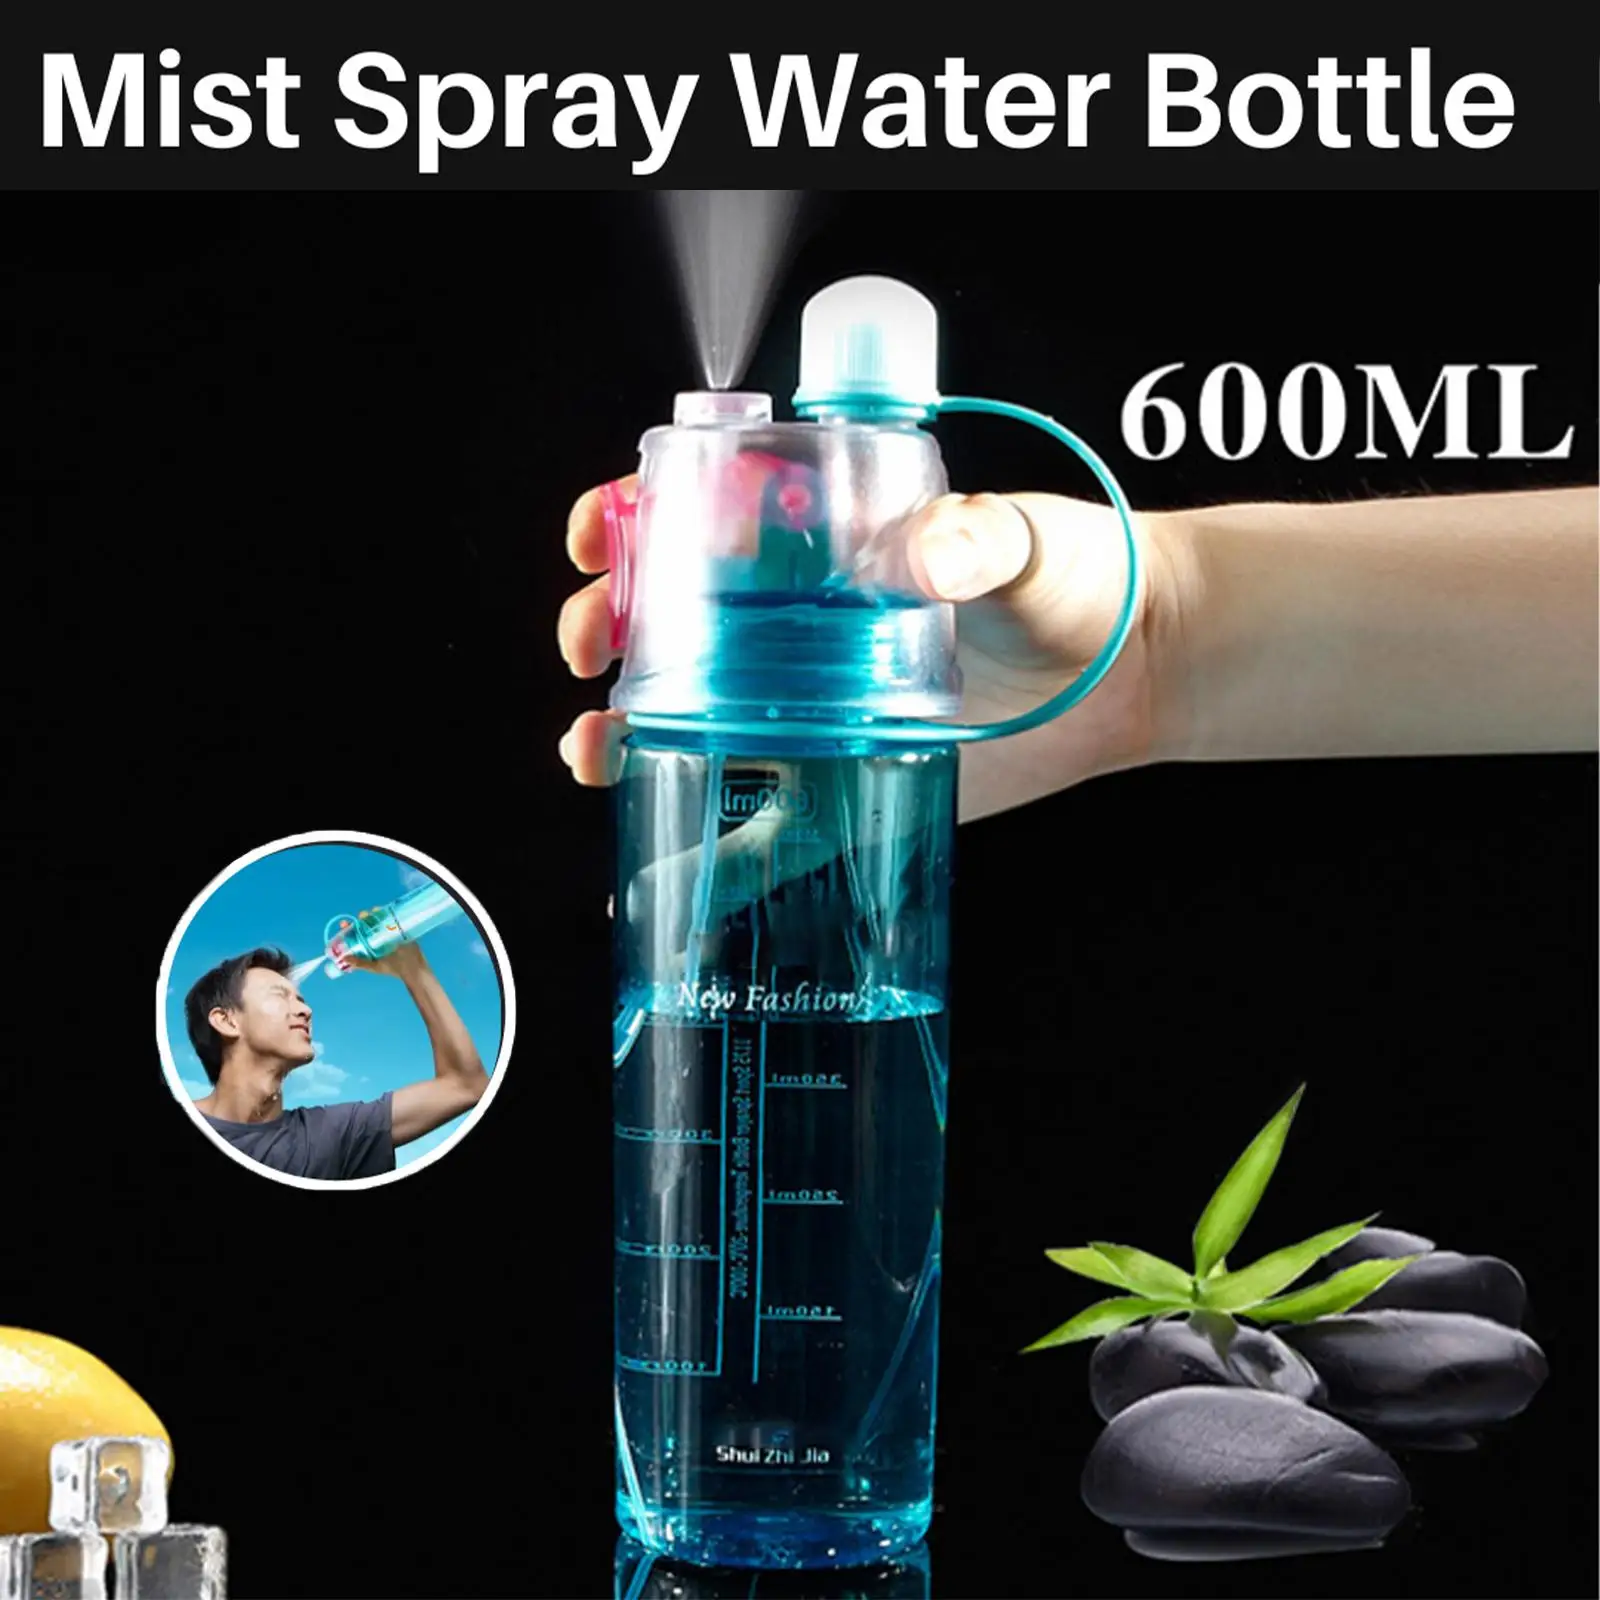 

New 600ml PC Mist Spray Water Bottle High Capacity Summer Ice Cold Bottle Sports Outdoor Drinking Kettle For Adults Kids U7R7